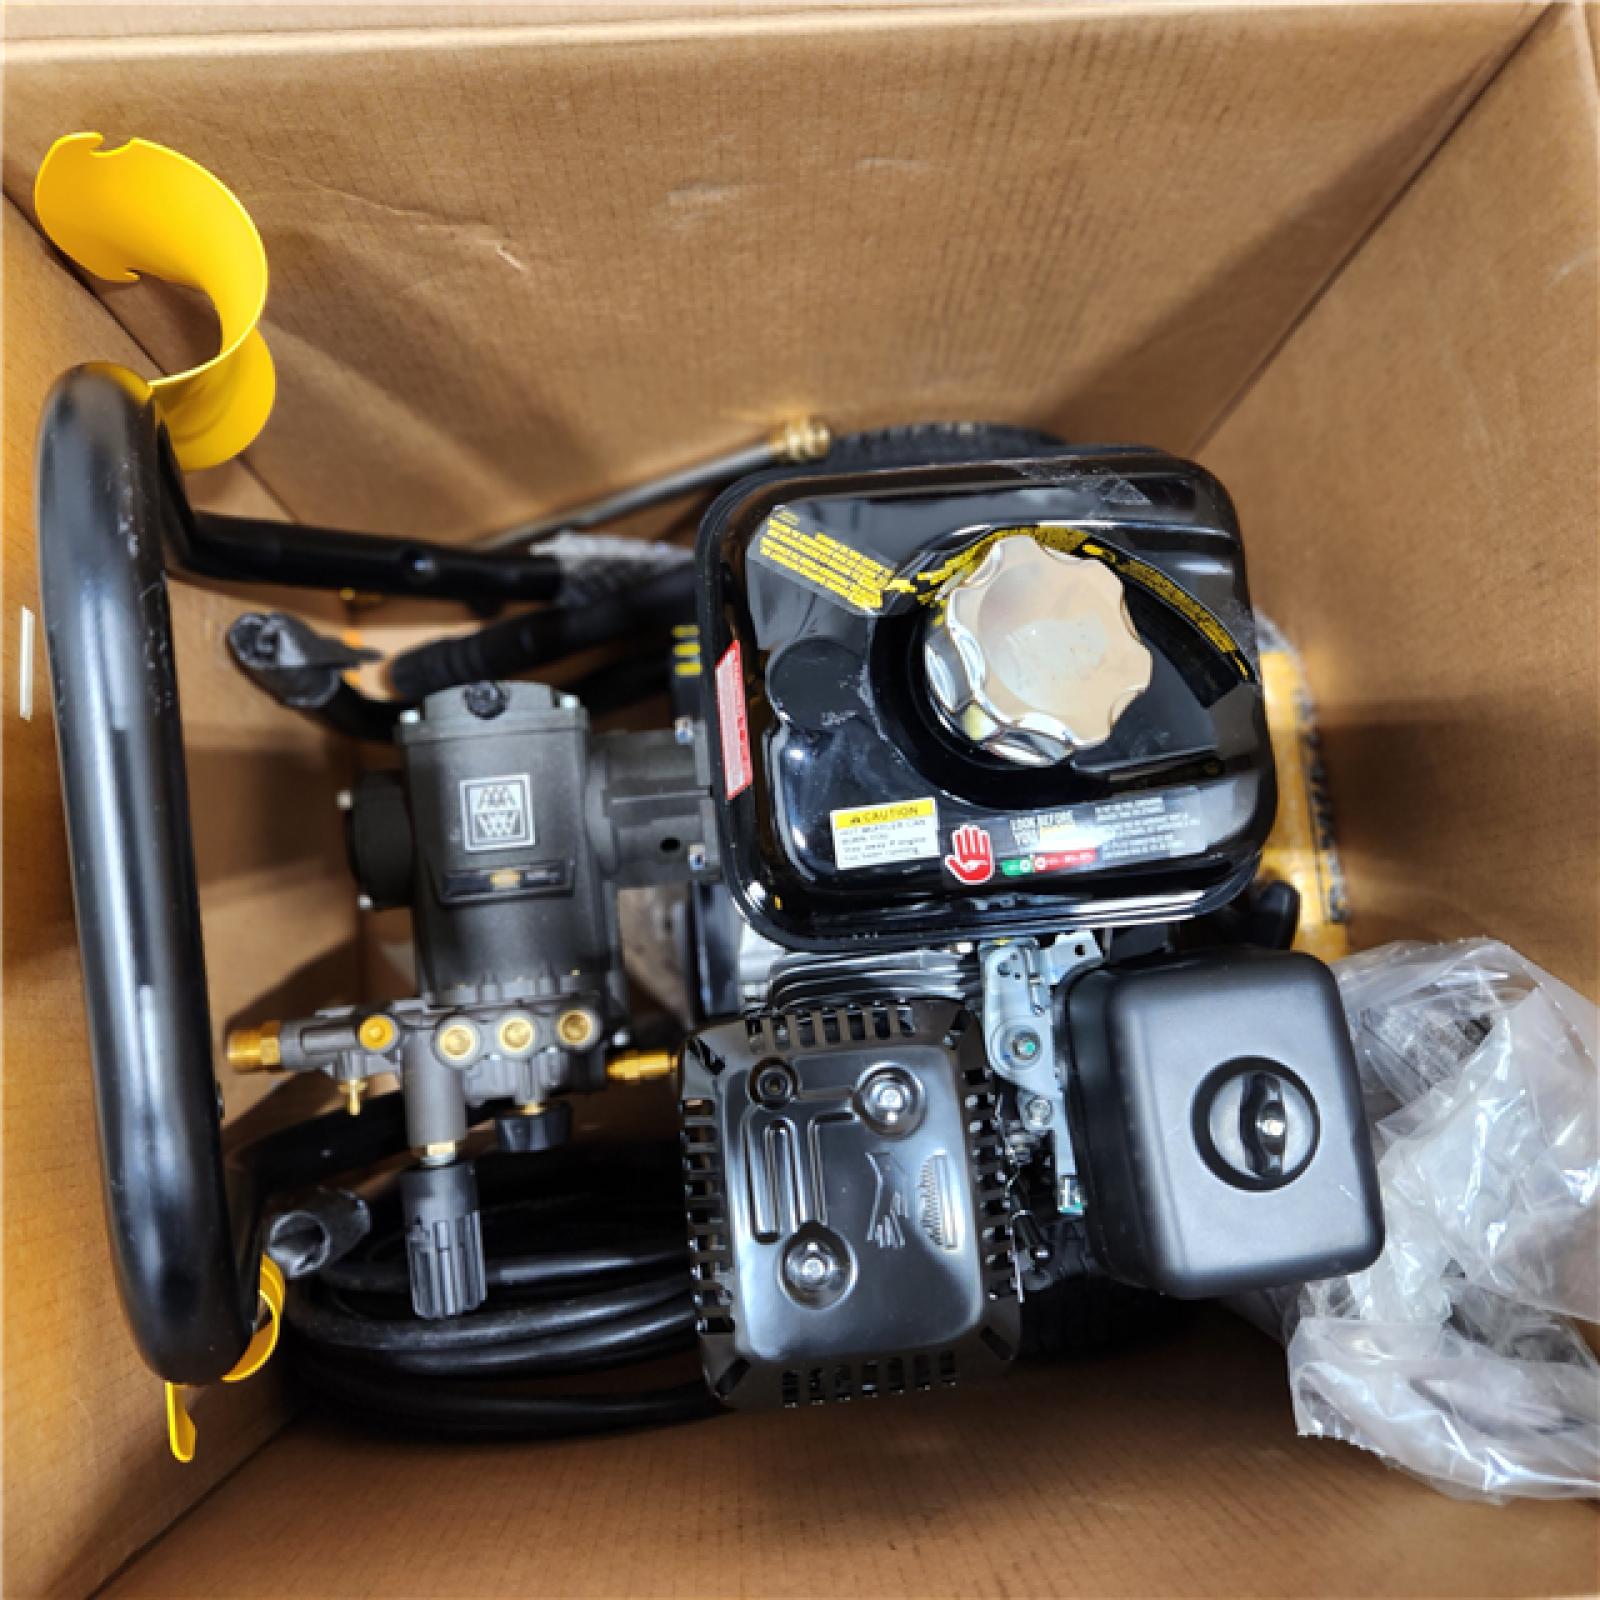 Dallas Location - As-Is DEWALT 3600 PSI 2.5 GPM Gas Pressure Washer-Appears Excellent Condition